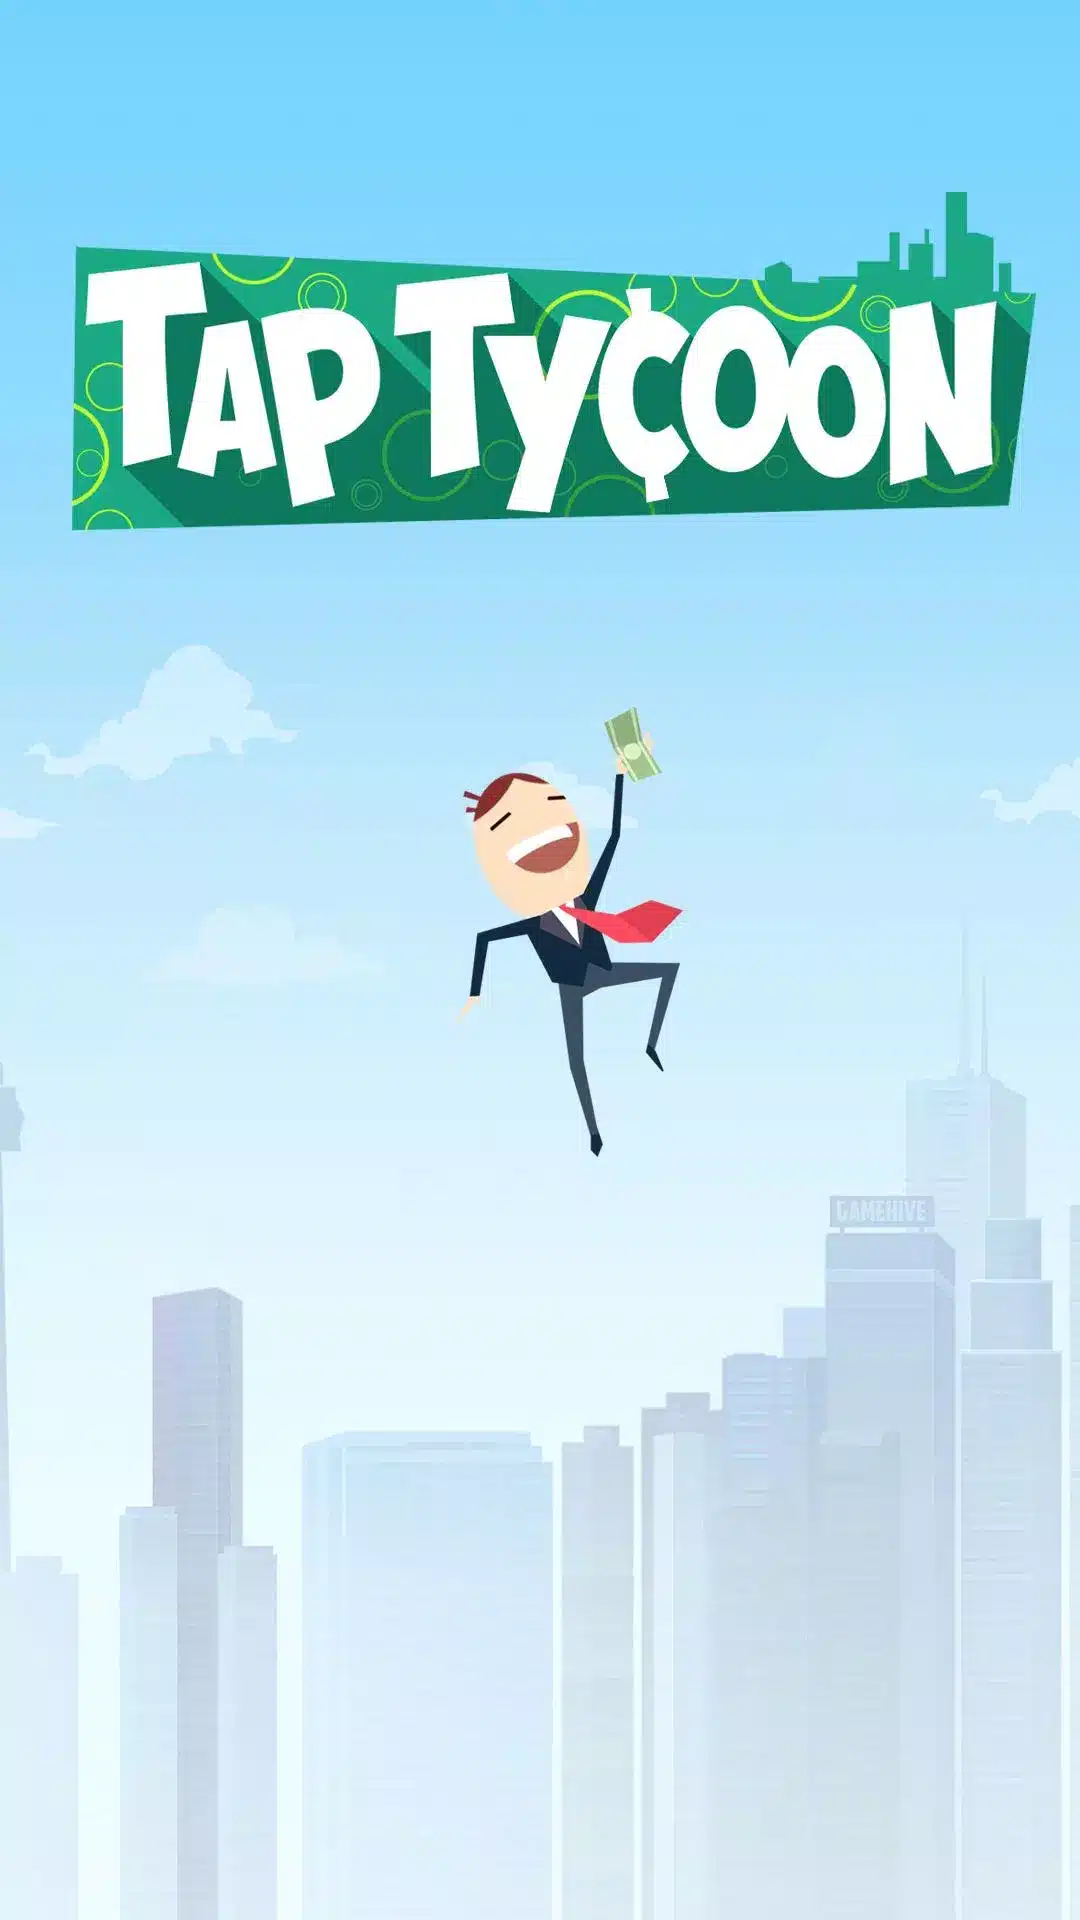 Tap Tycoon Image 1